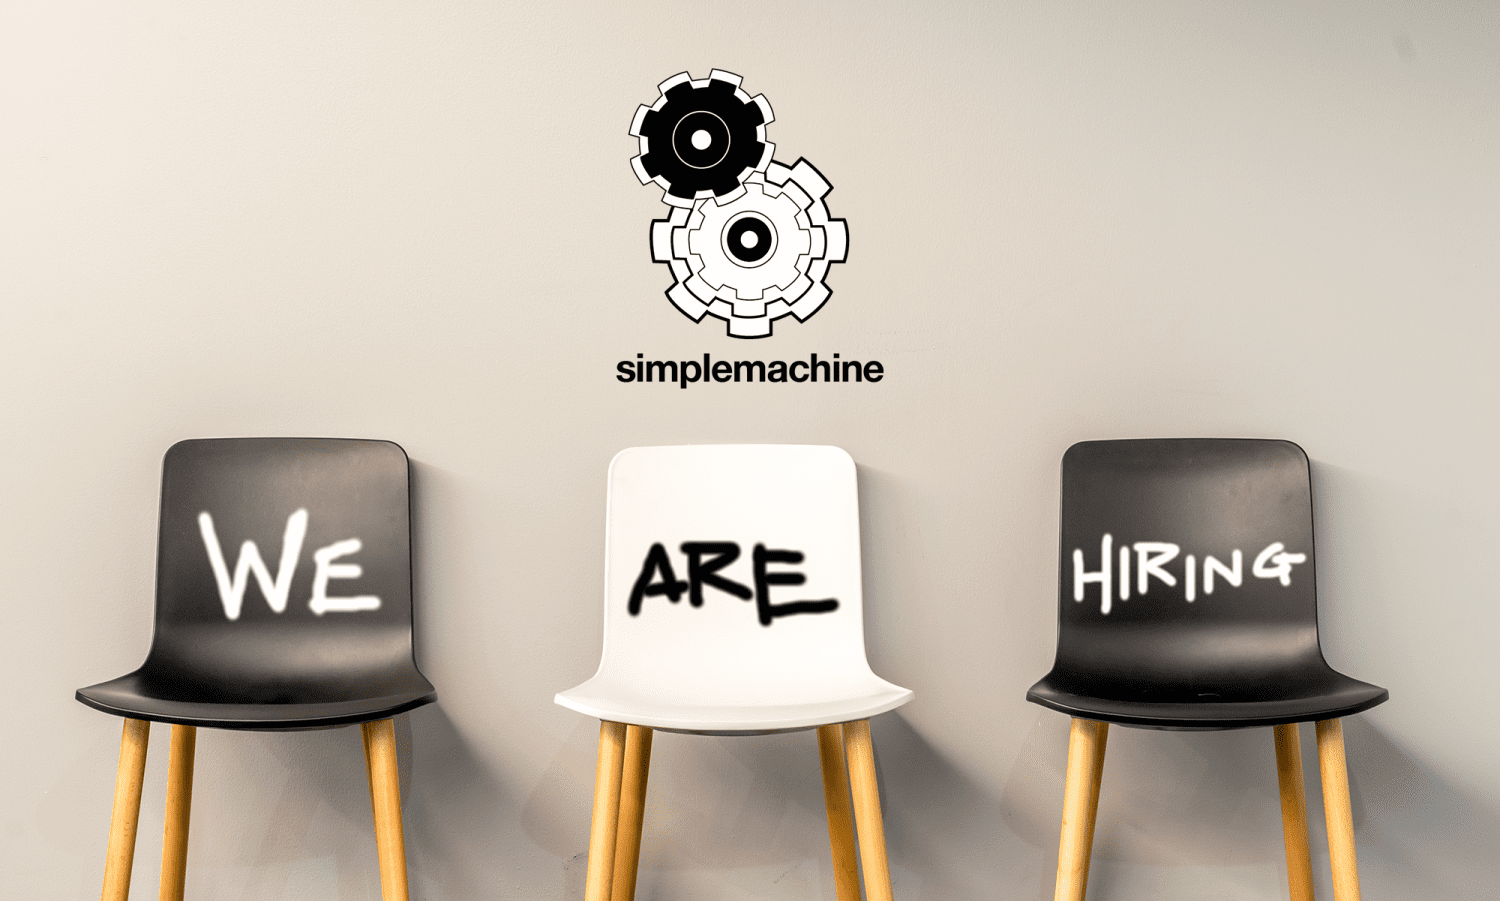 Simplemachine is Hiring!